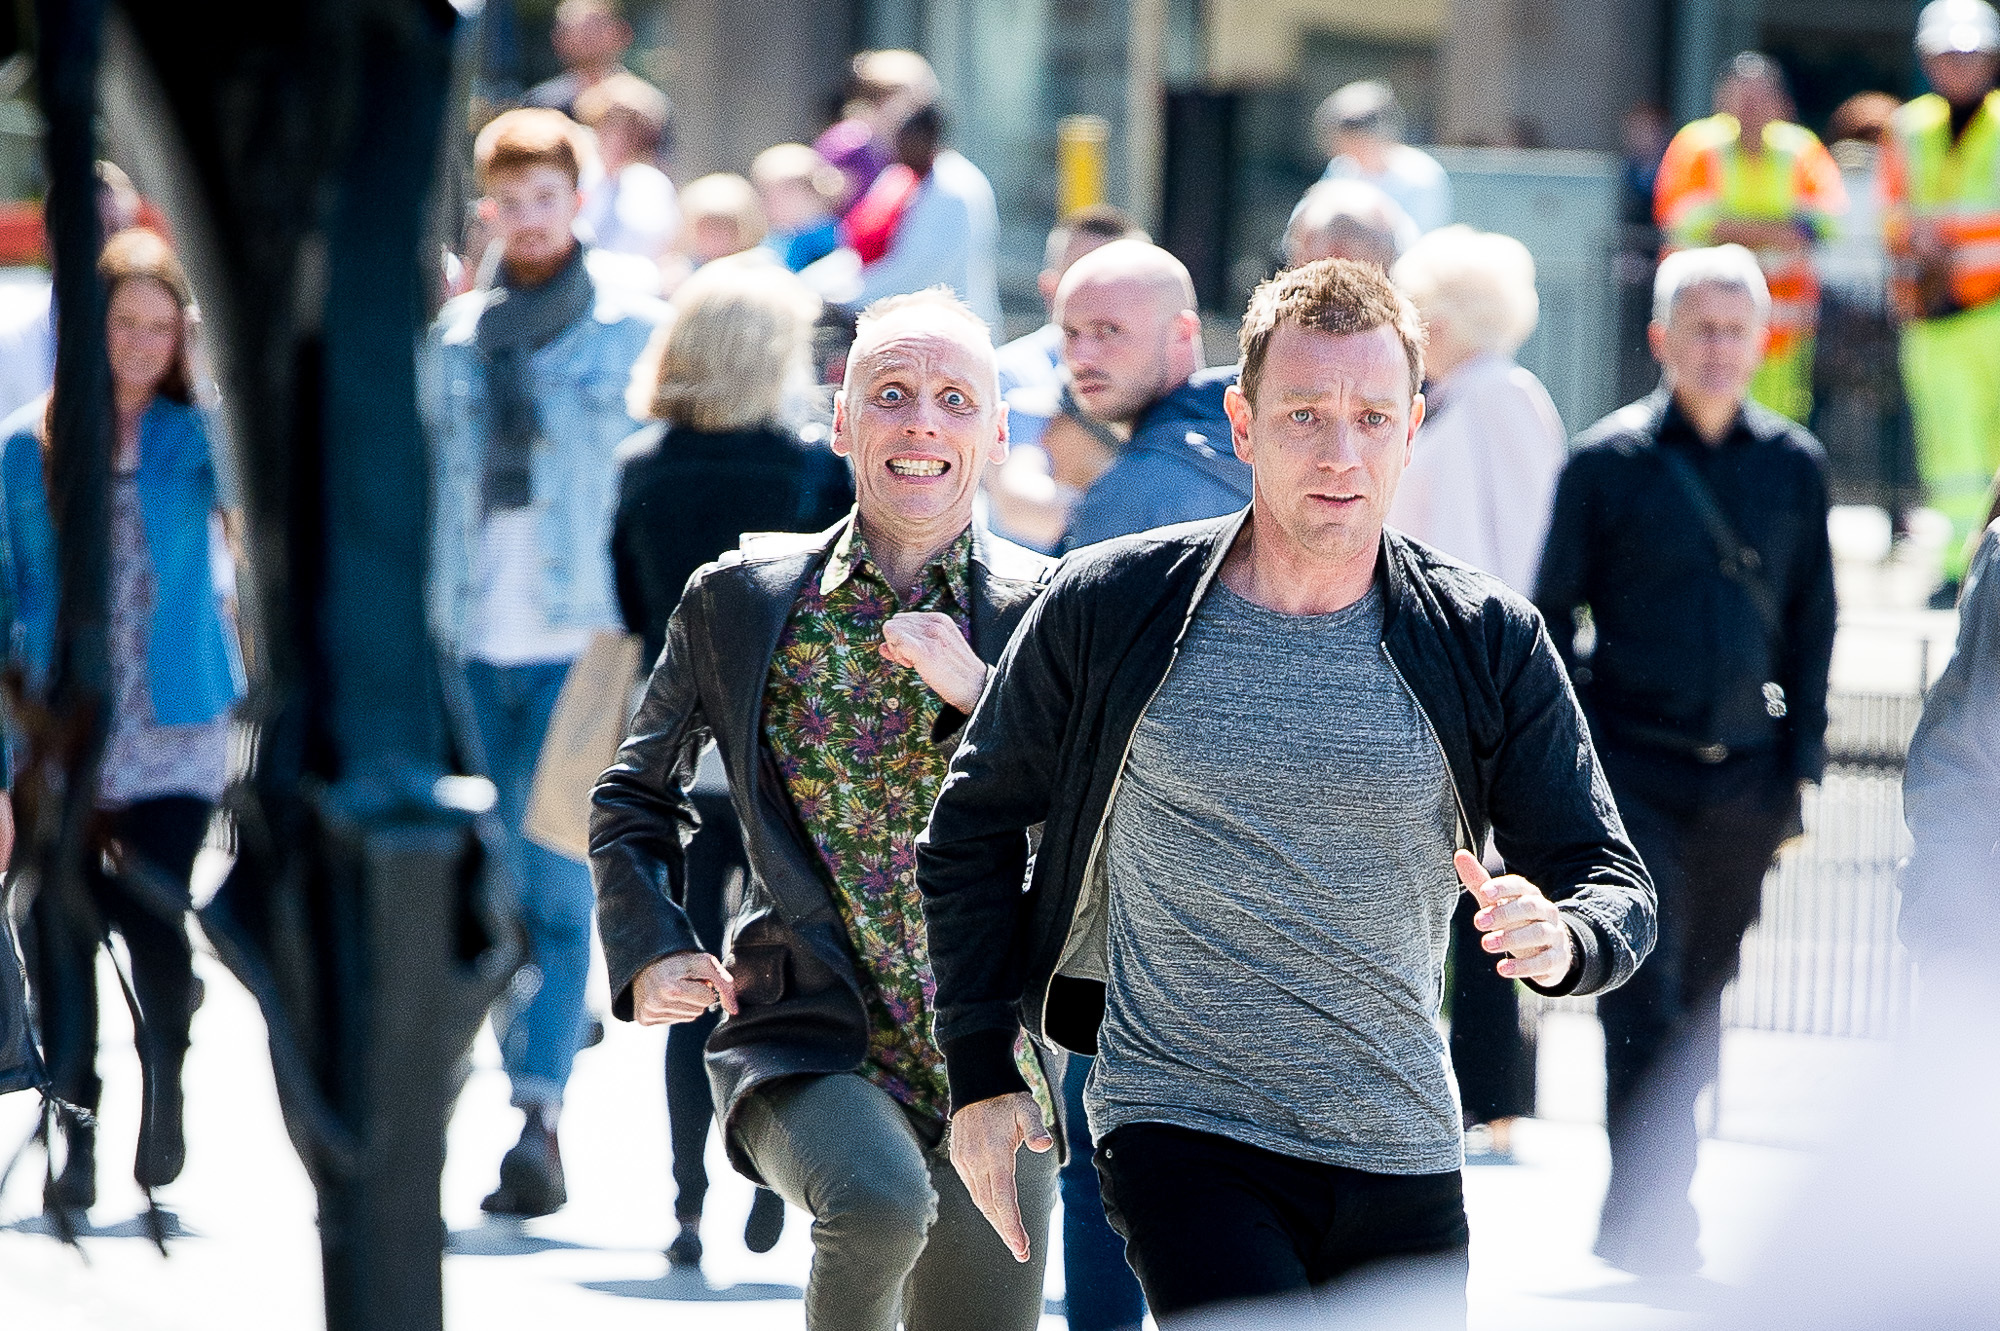 Spud and Renton flee after shoplifting in T2 Trainspotting. The crime - often to feed addiction - has surged in Tayside and Fife.